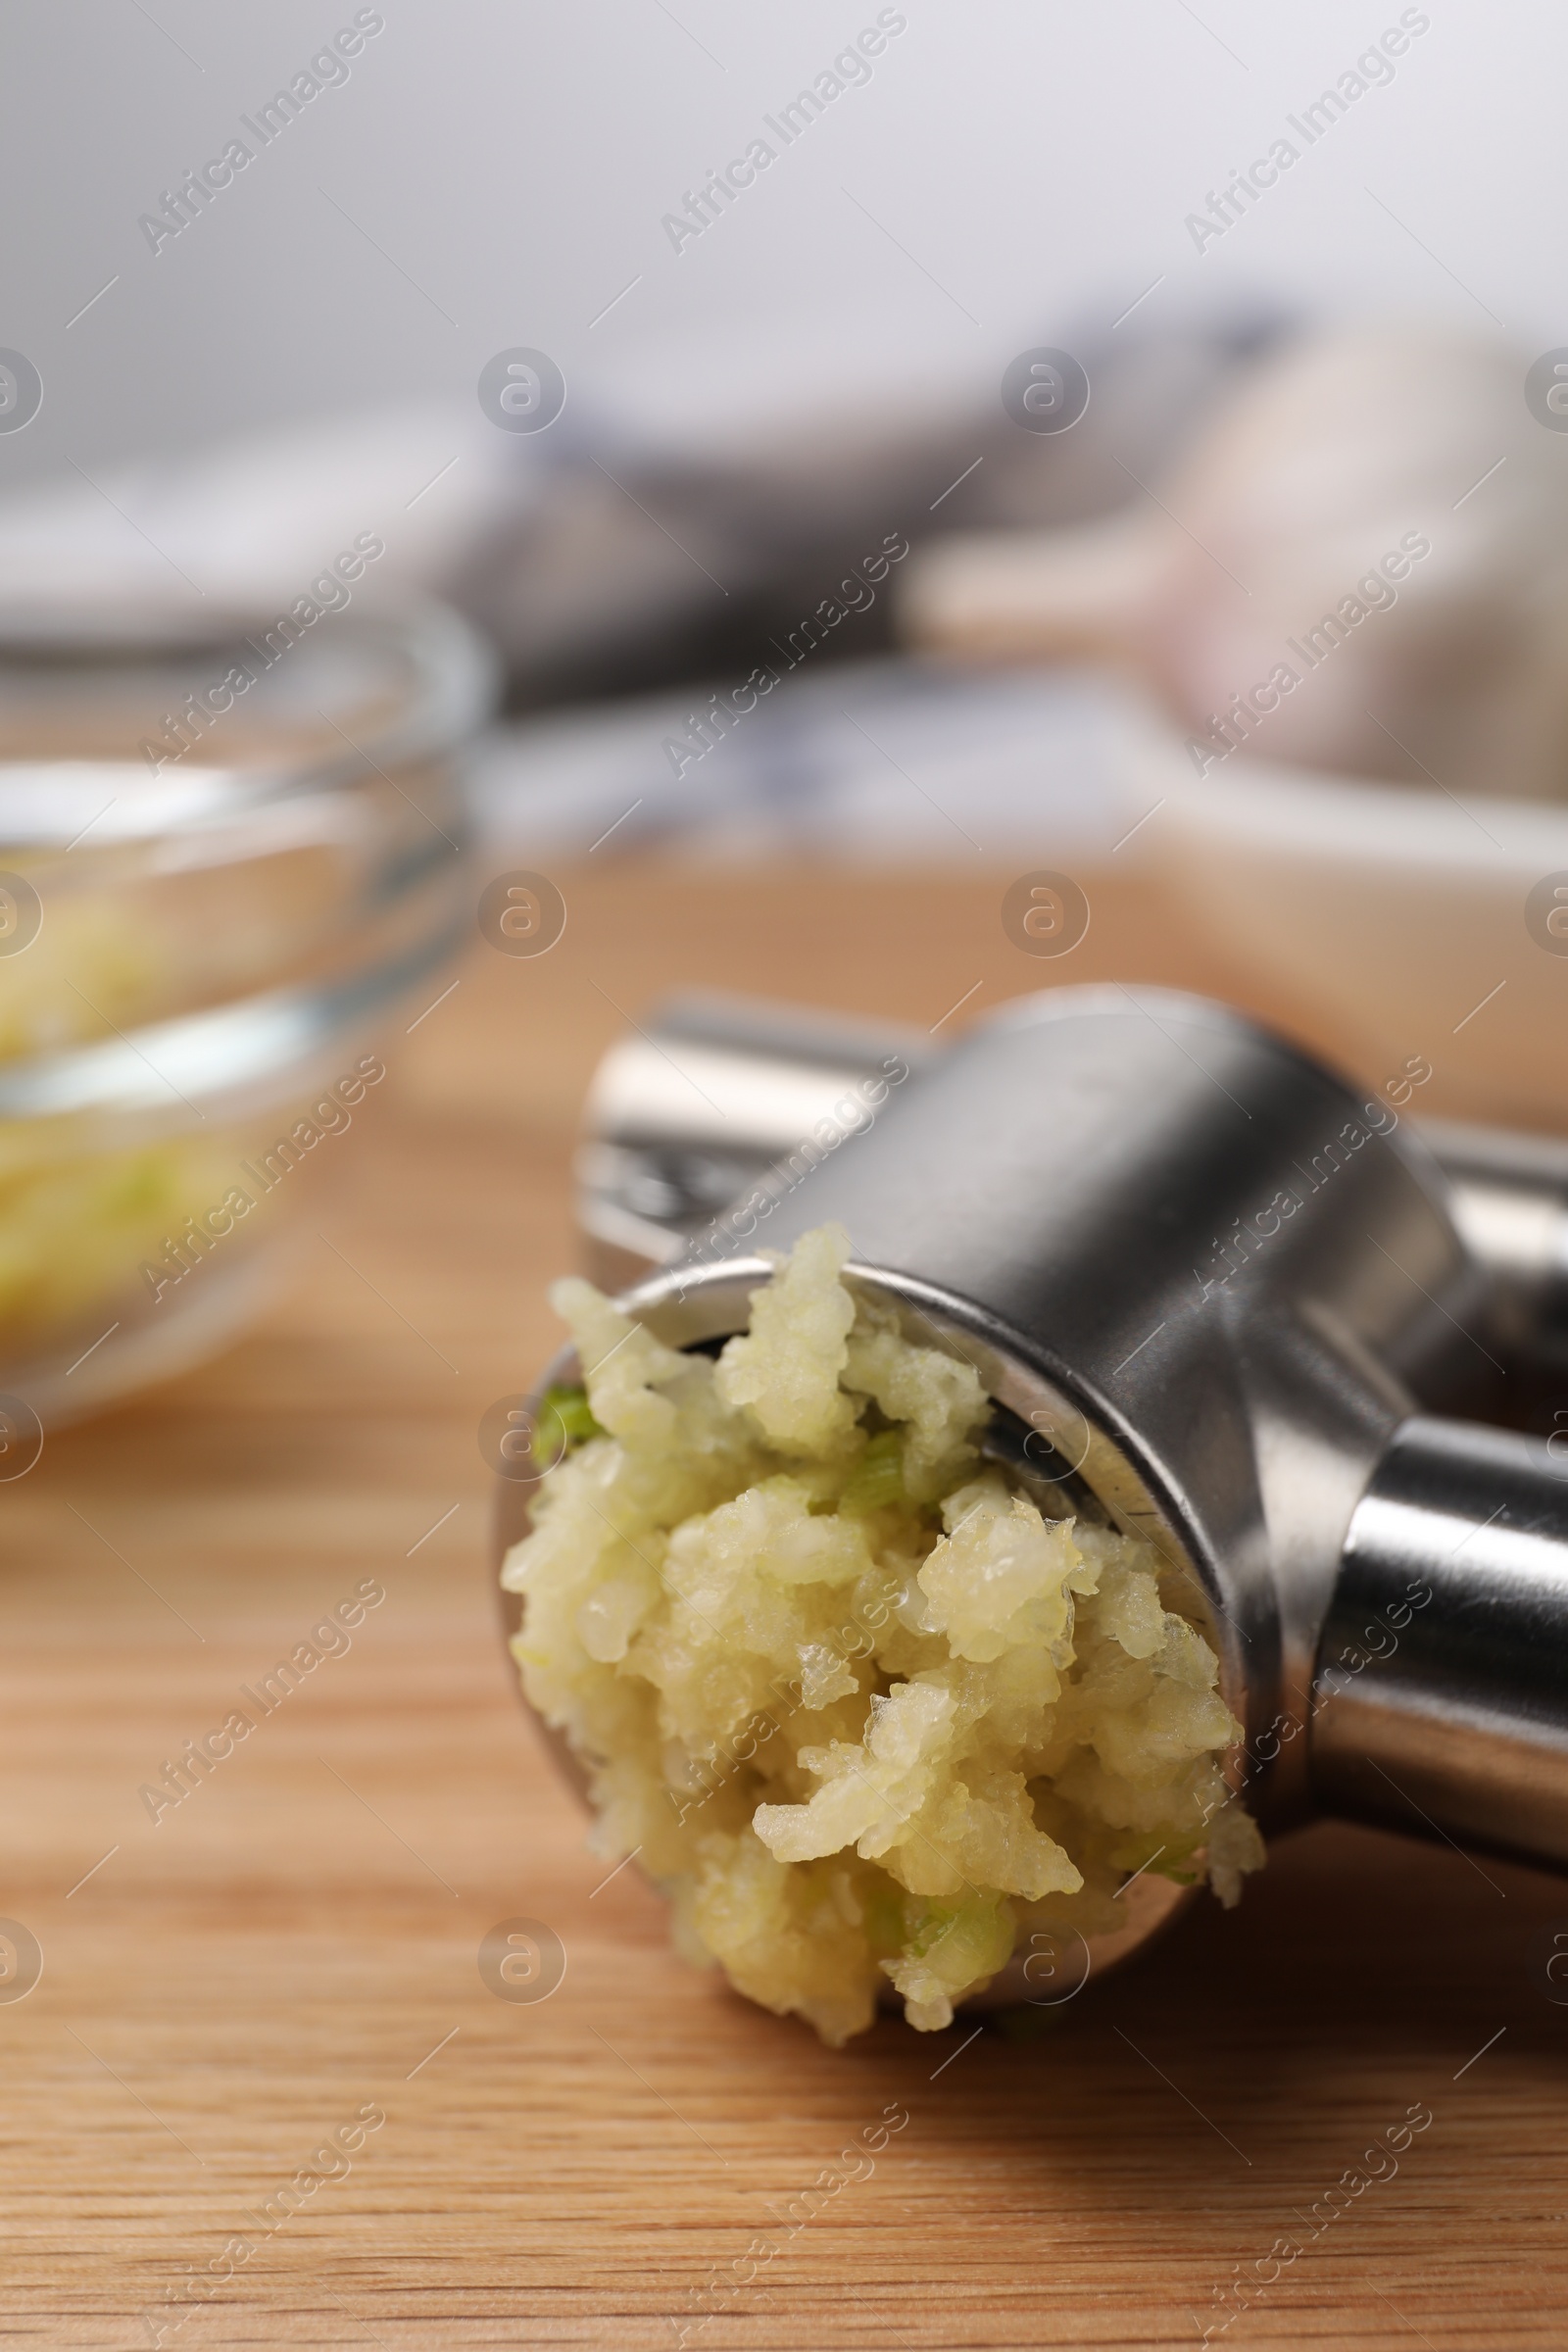 Photo of One metal press with crushed garlic on wooden table, closeup